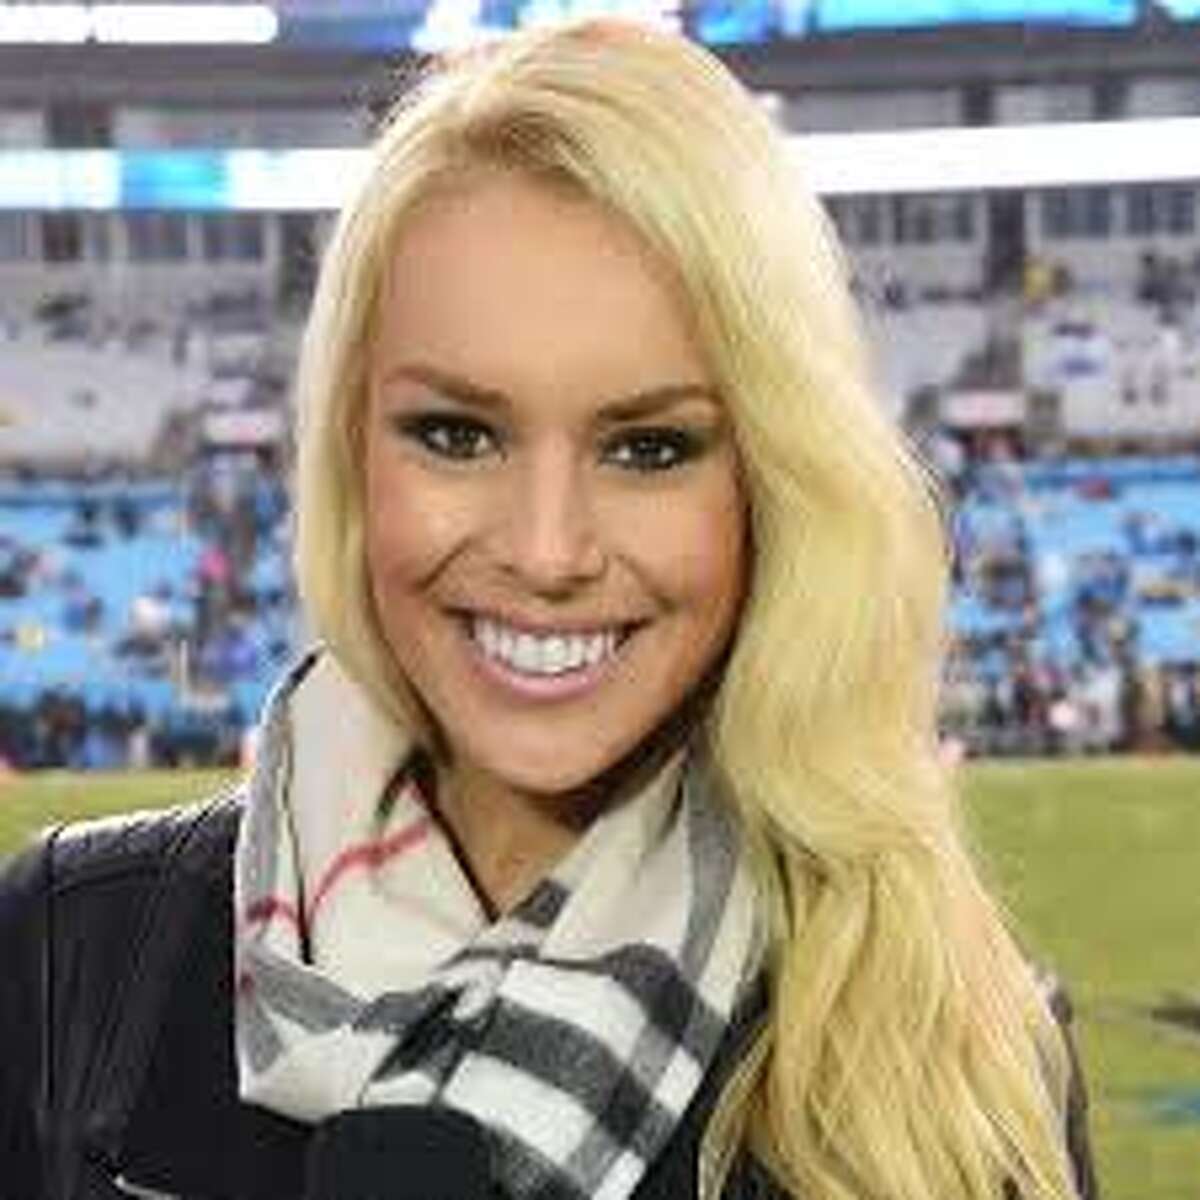 ESPN anchor Britt McHenry was among a score of ESPN reporters and broadcasters who lost their jobs when the network downsized in the wake of declining subscribers and rapidly expanding rights fees. (ESPN file photo). 